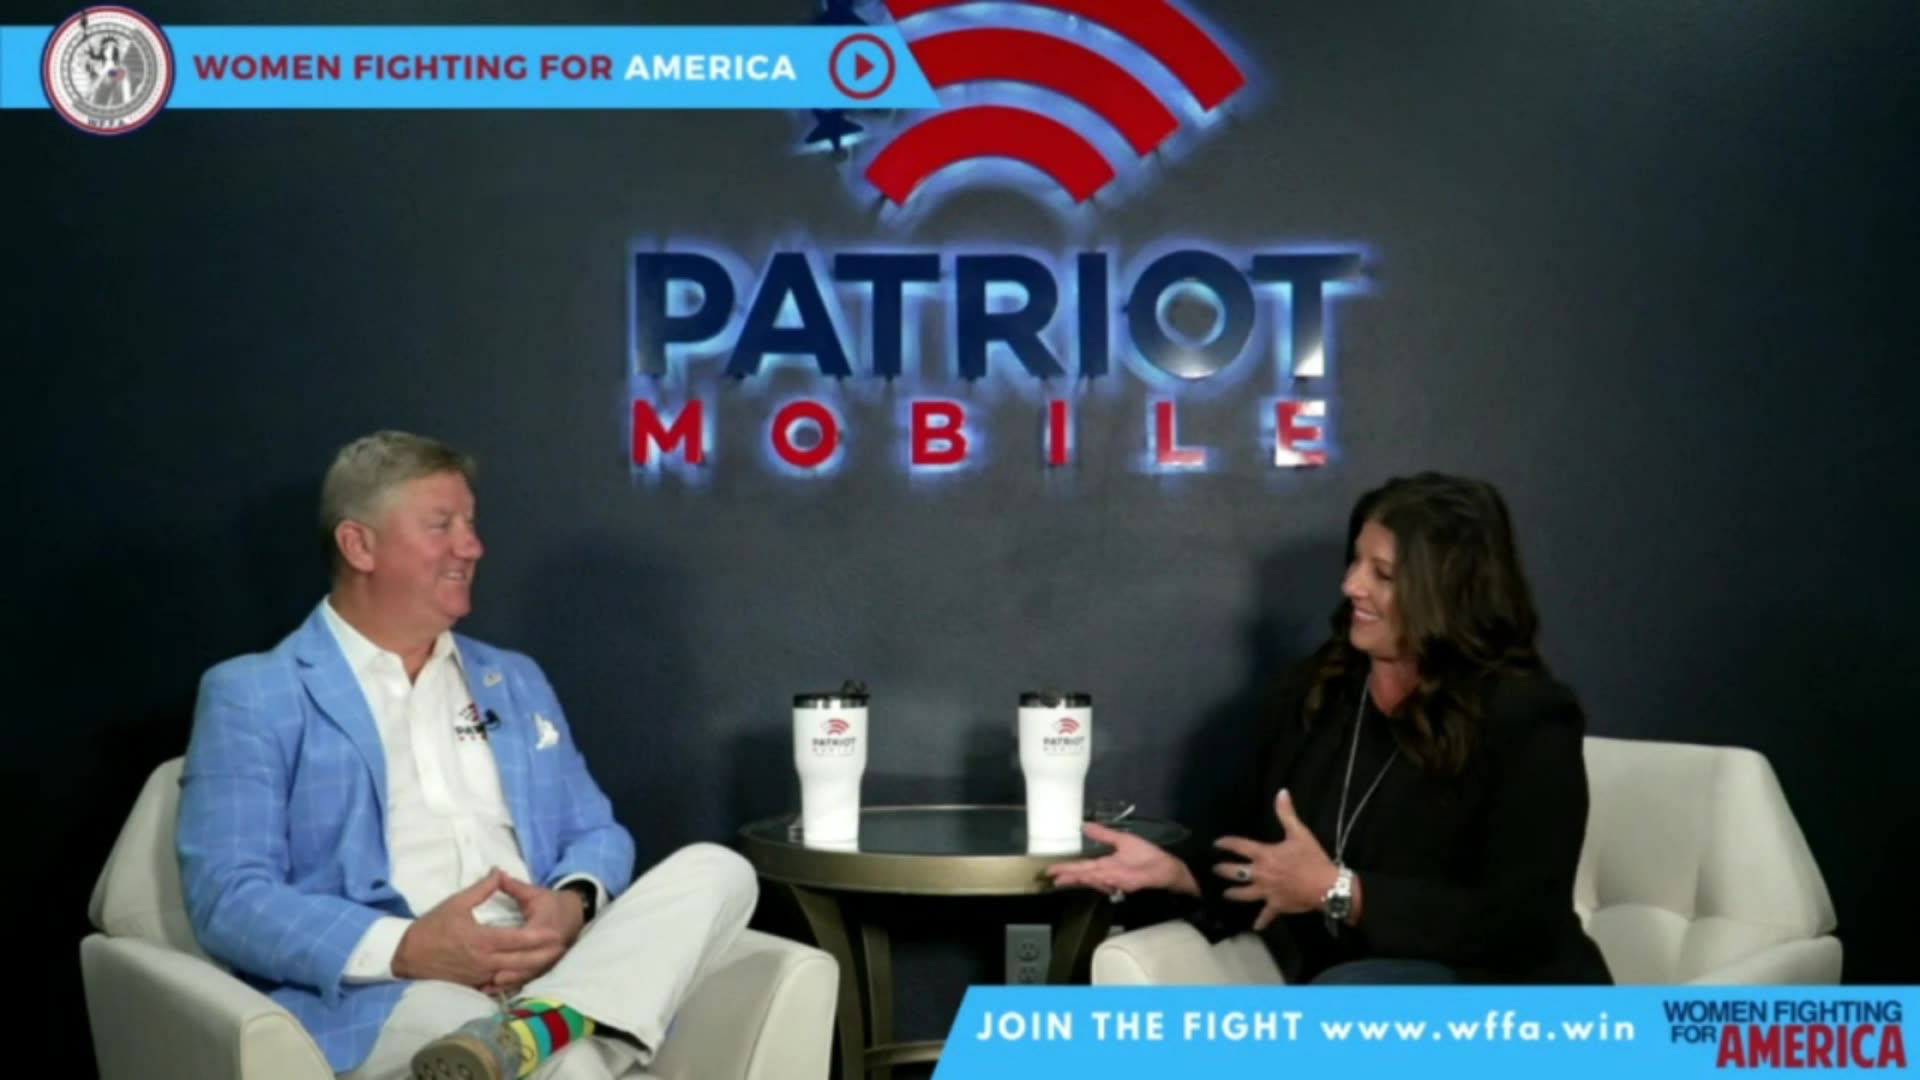 Introducing Patriot Mobile & Women Fighting for America Partnership